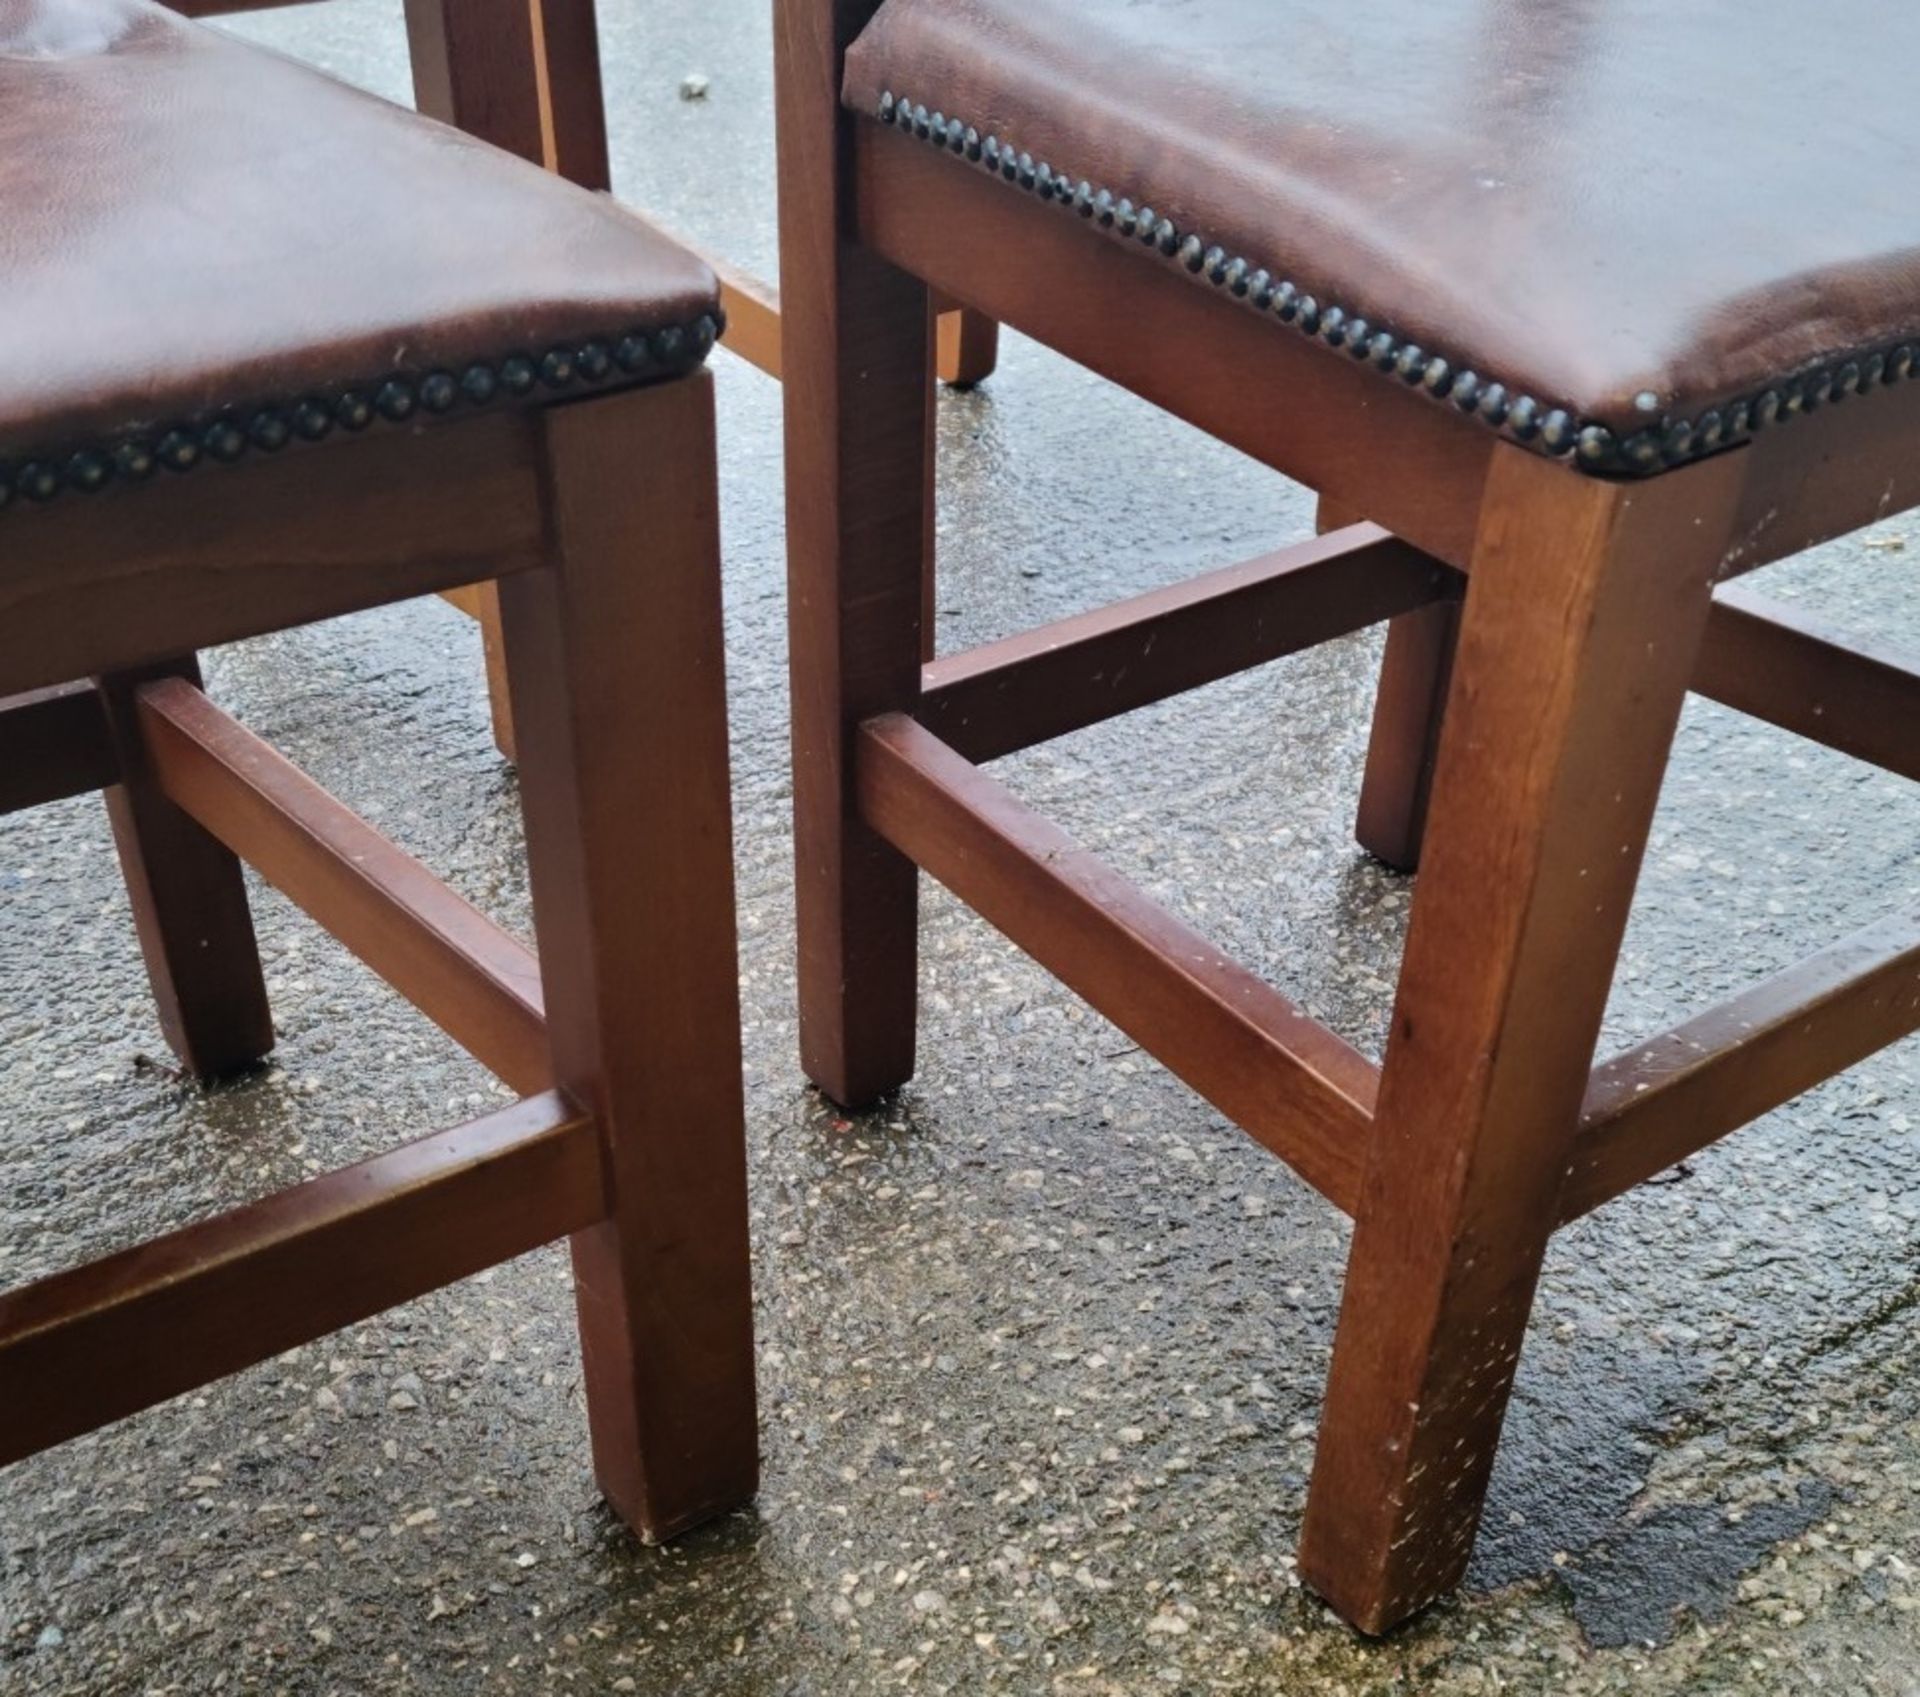 Set Of 4 x Aztec Print Dining Chairs With Faux Brown Leather Seating & Studded Seams - Image 6 of 6